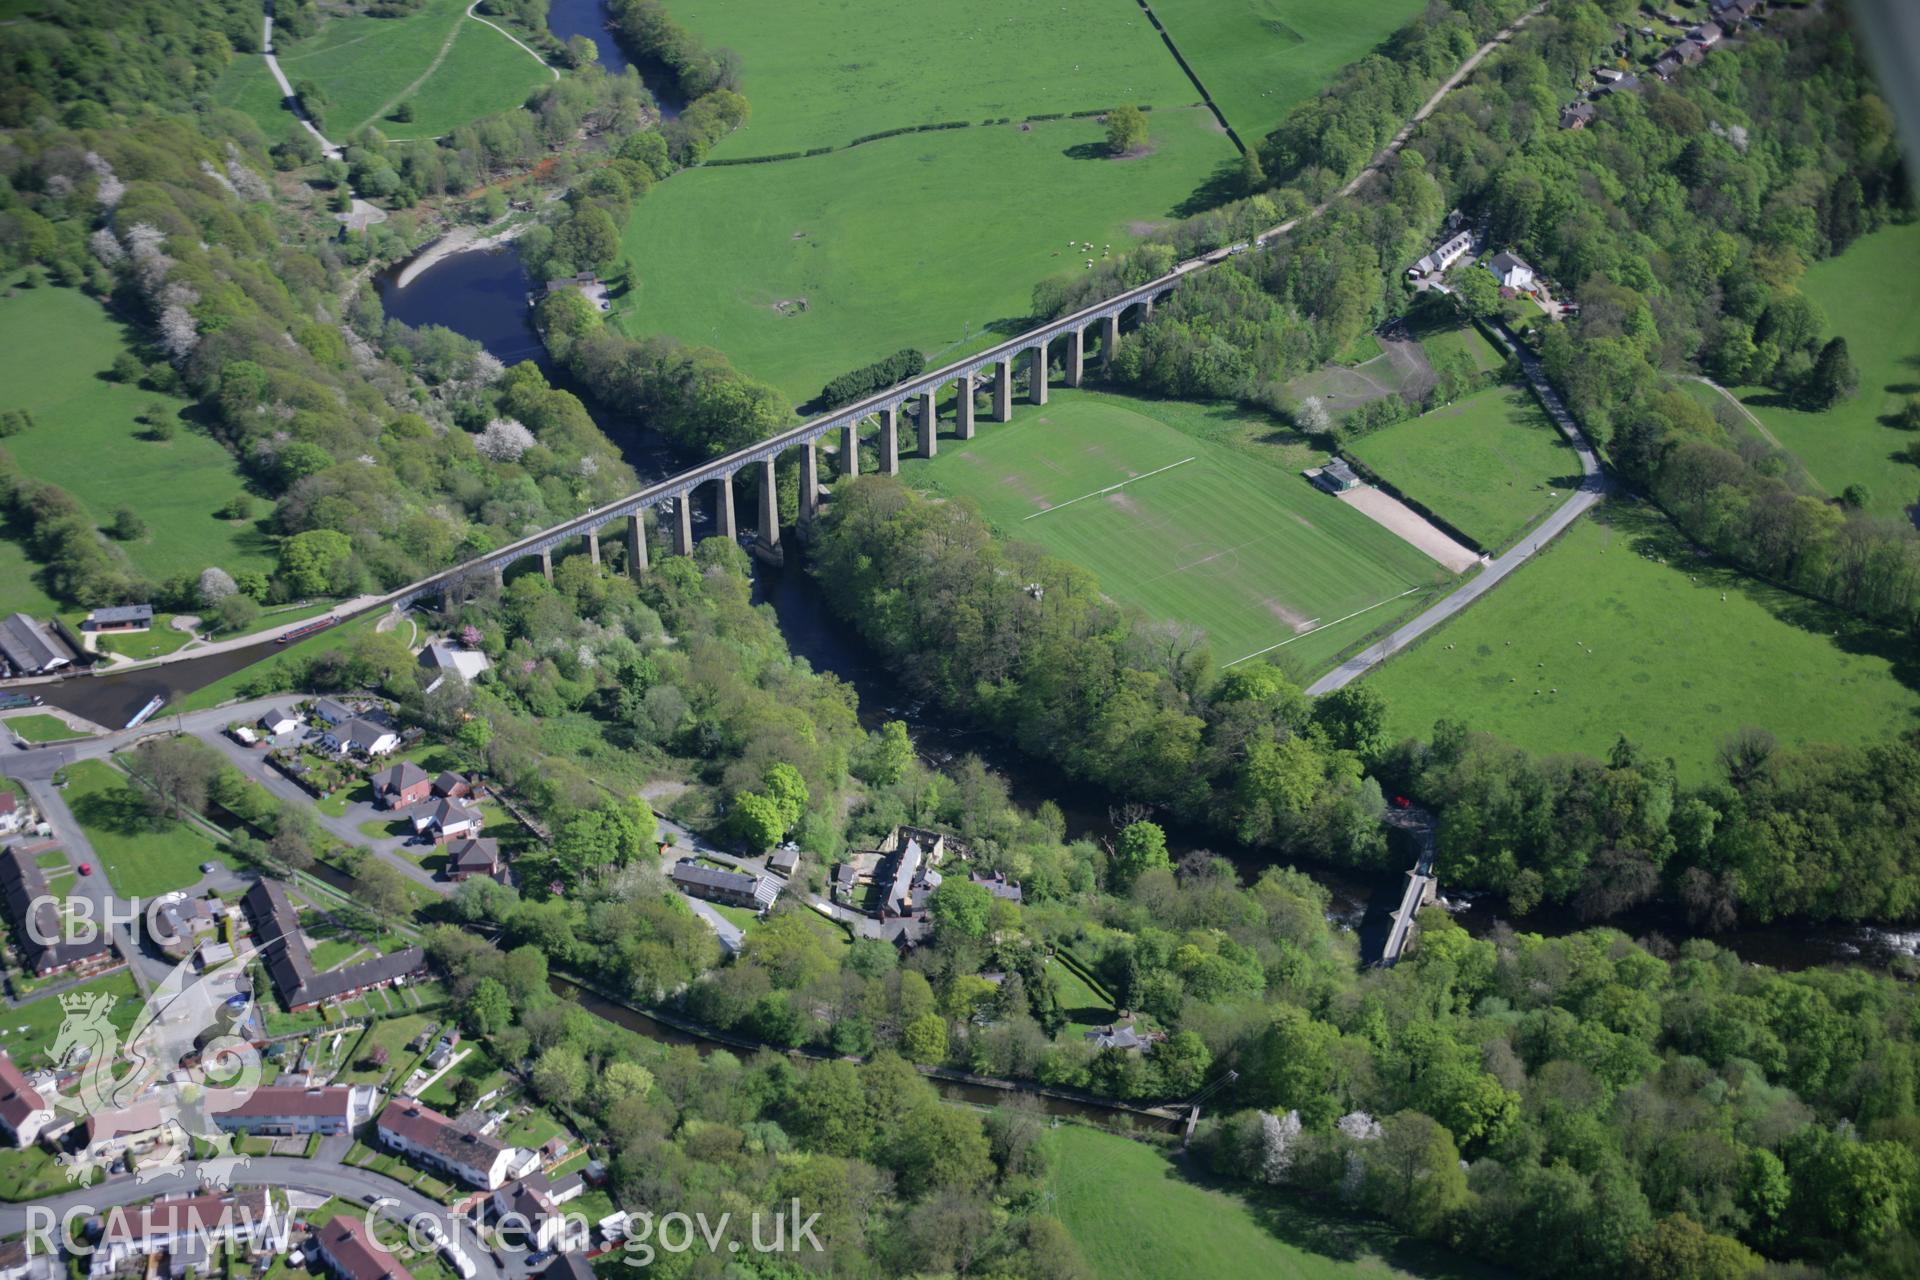 RCAHMW digital colour oblique photograph of Pontcysyllte Aqueduct from the north-west. Taken on 05/05/2006 by T.G. Driver.